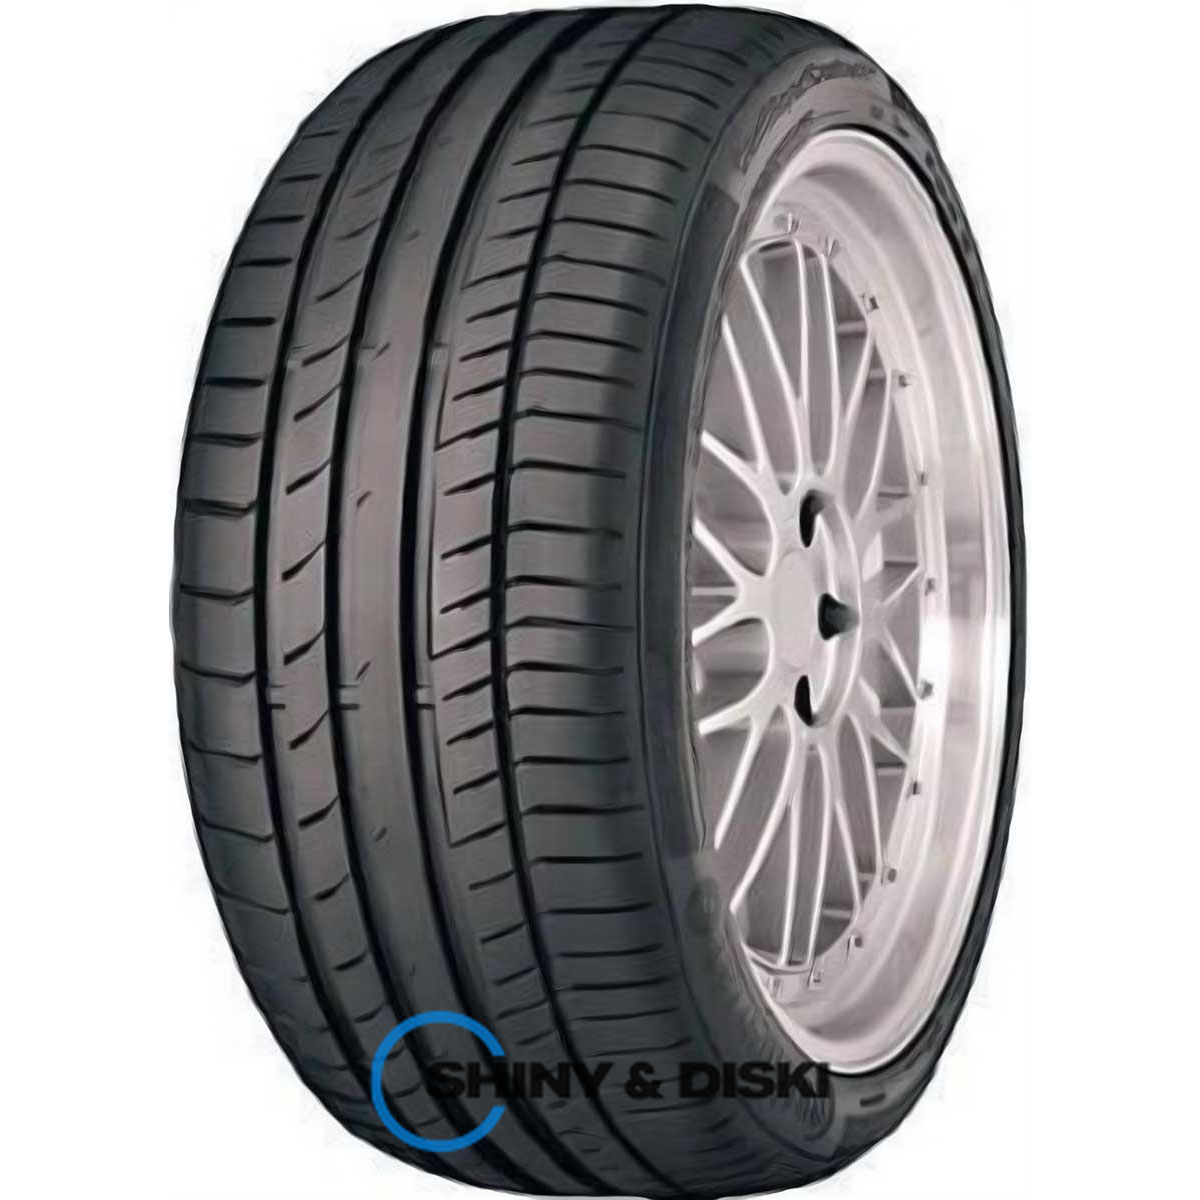 continental sportcontact 5p 305/30 r19 102y